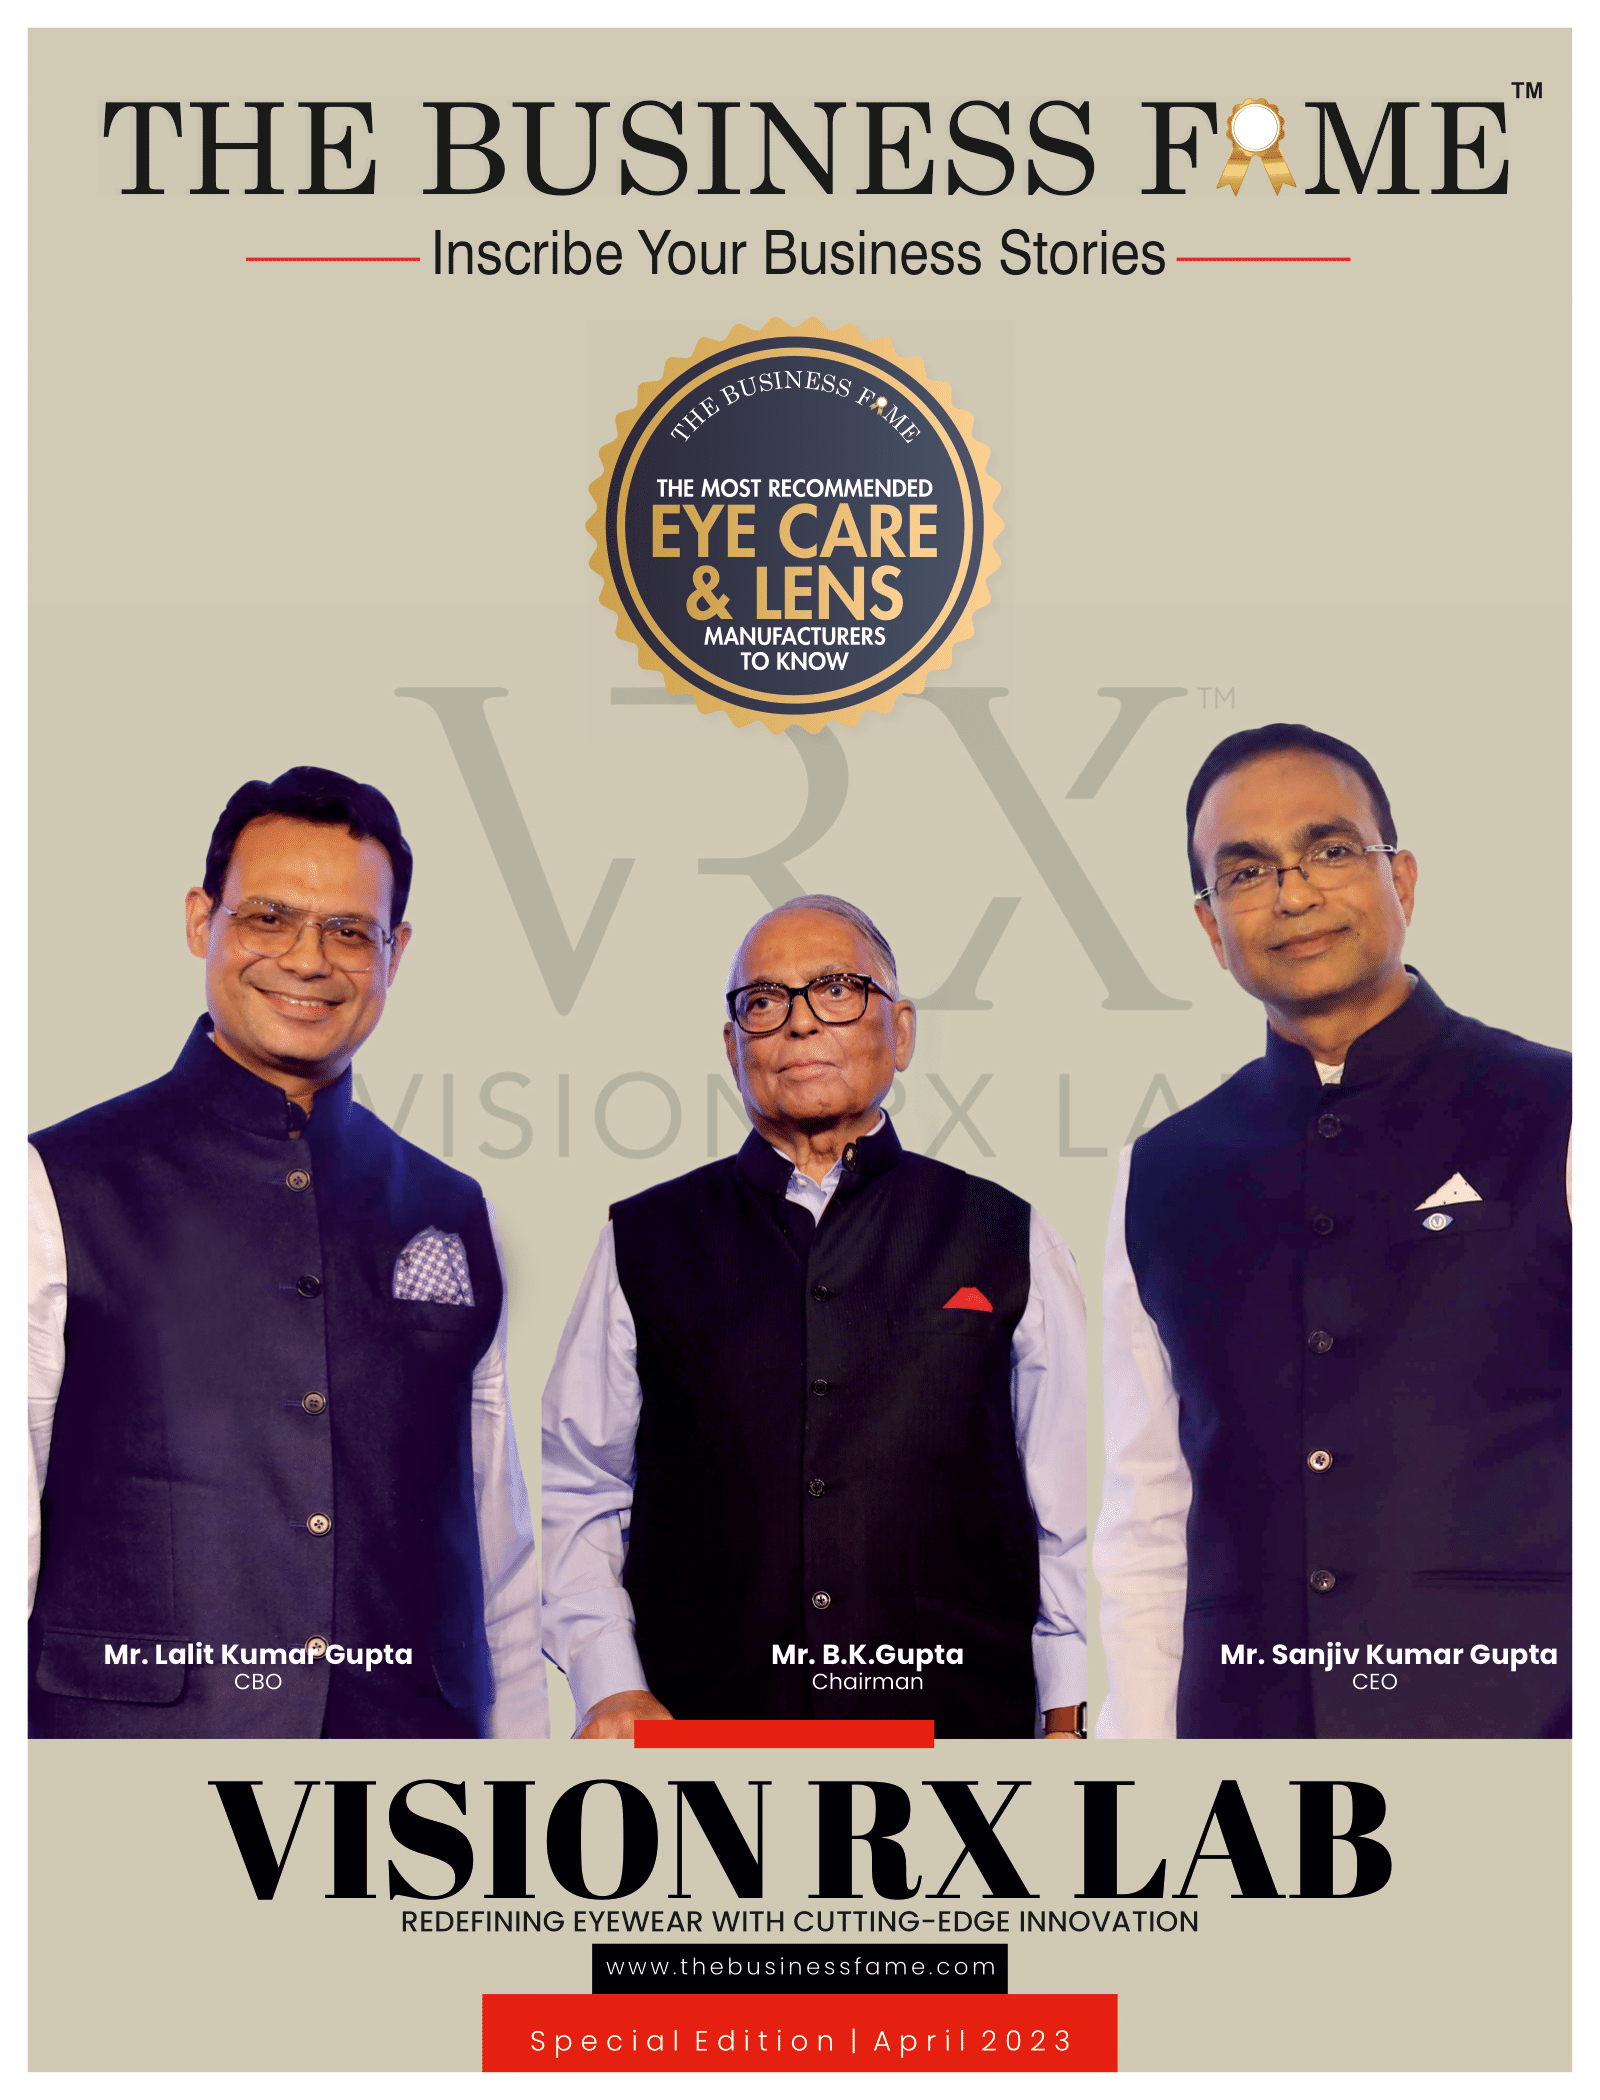 VISION RX LAB | The Business Fame